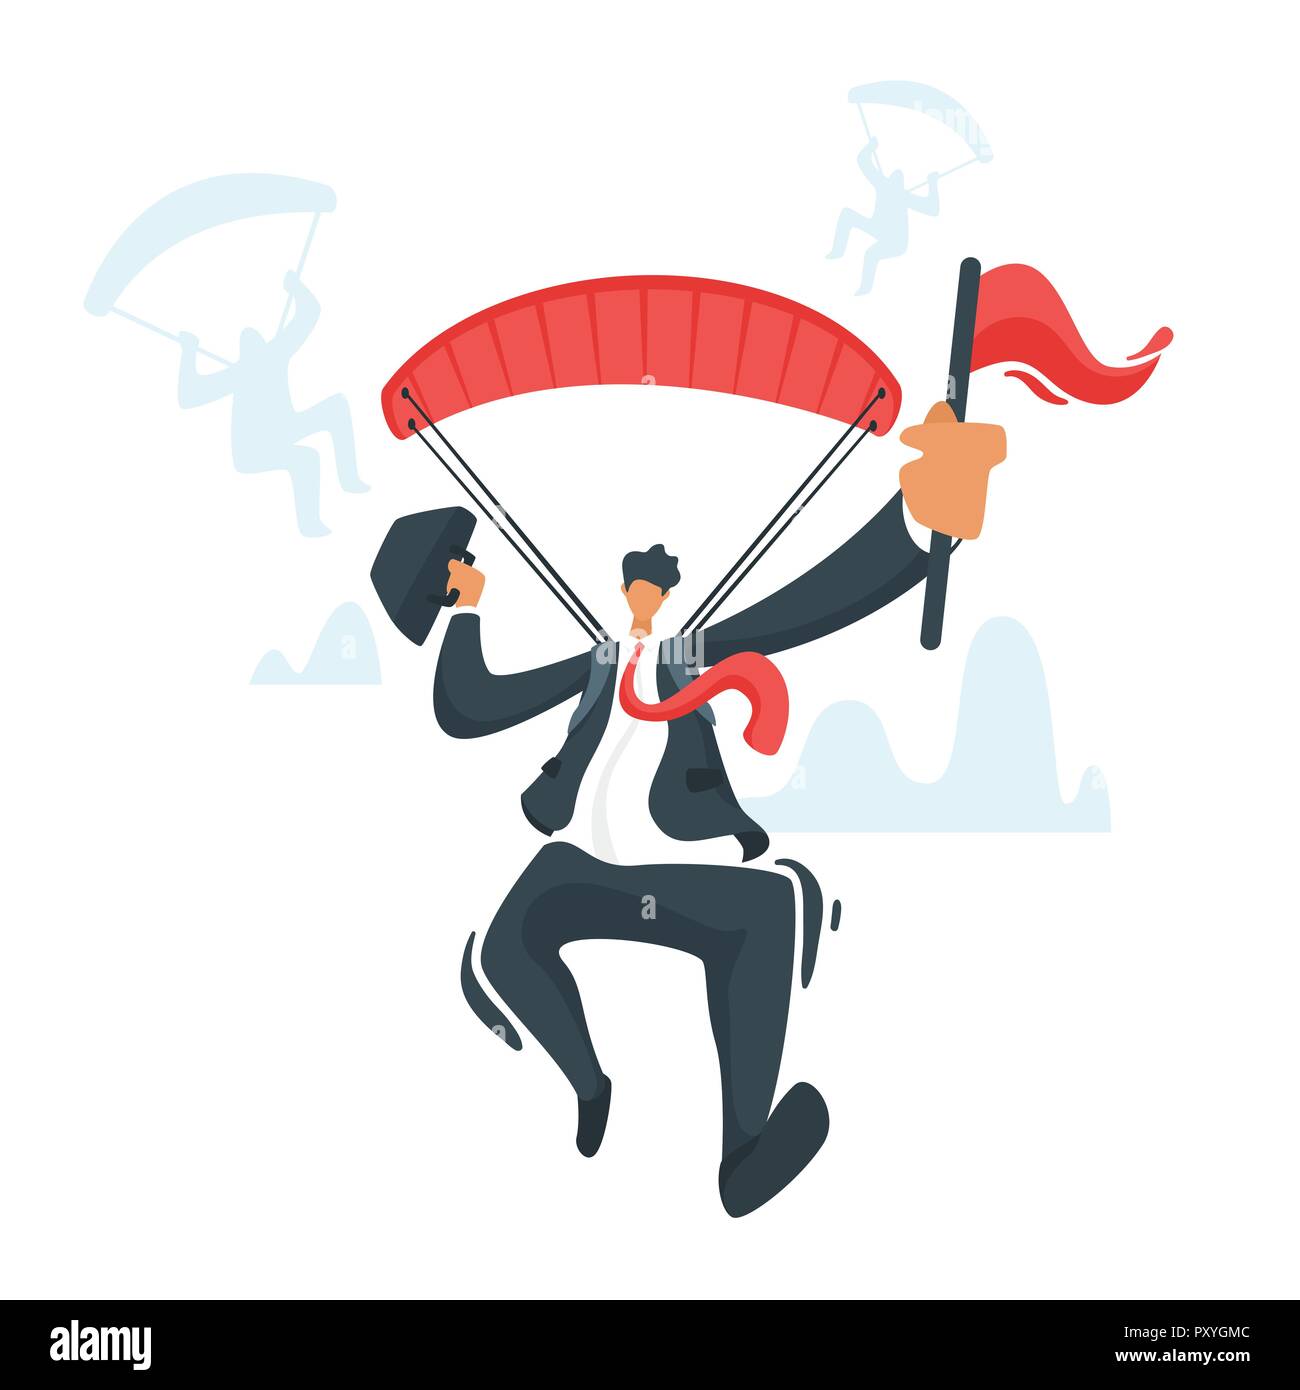 Vector flat style businessman with parachute holding red flag as a symbol of business goal. Leadership concept. Minimalism design with people silhouet Stock Vector